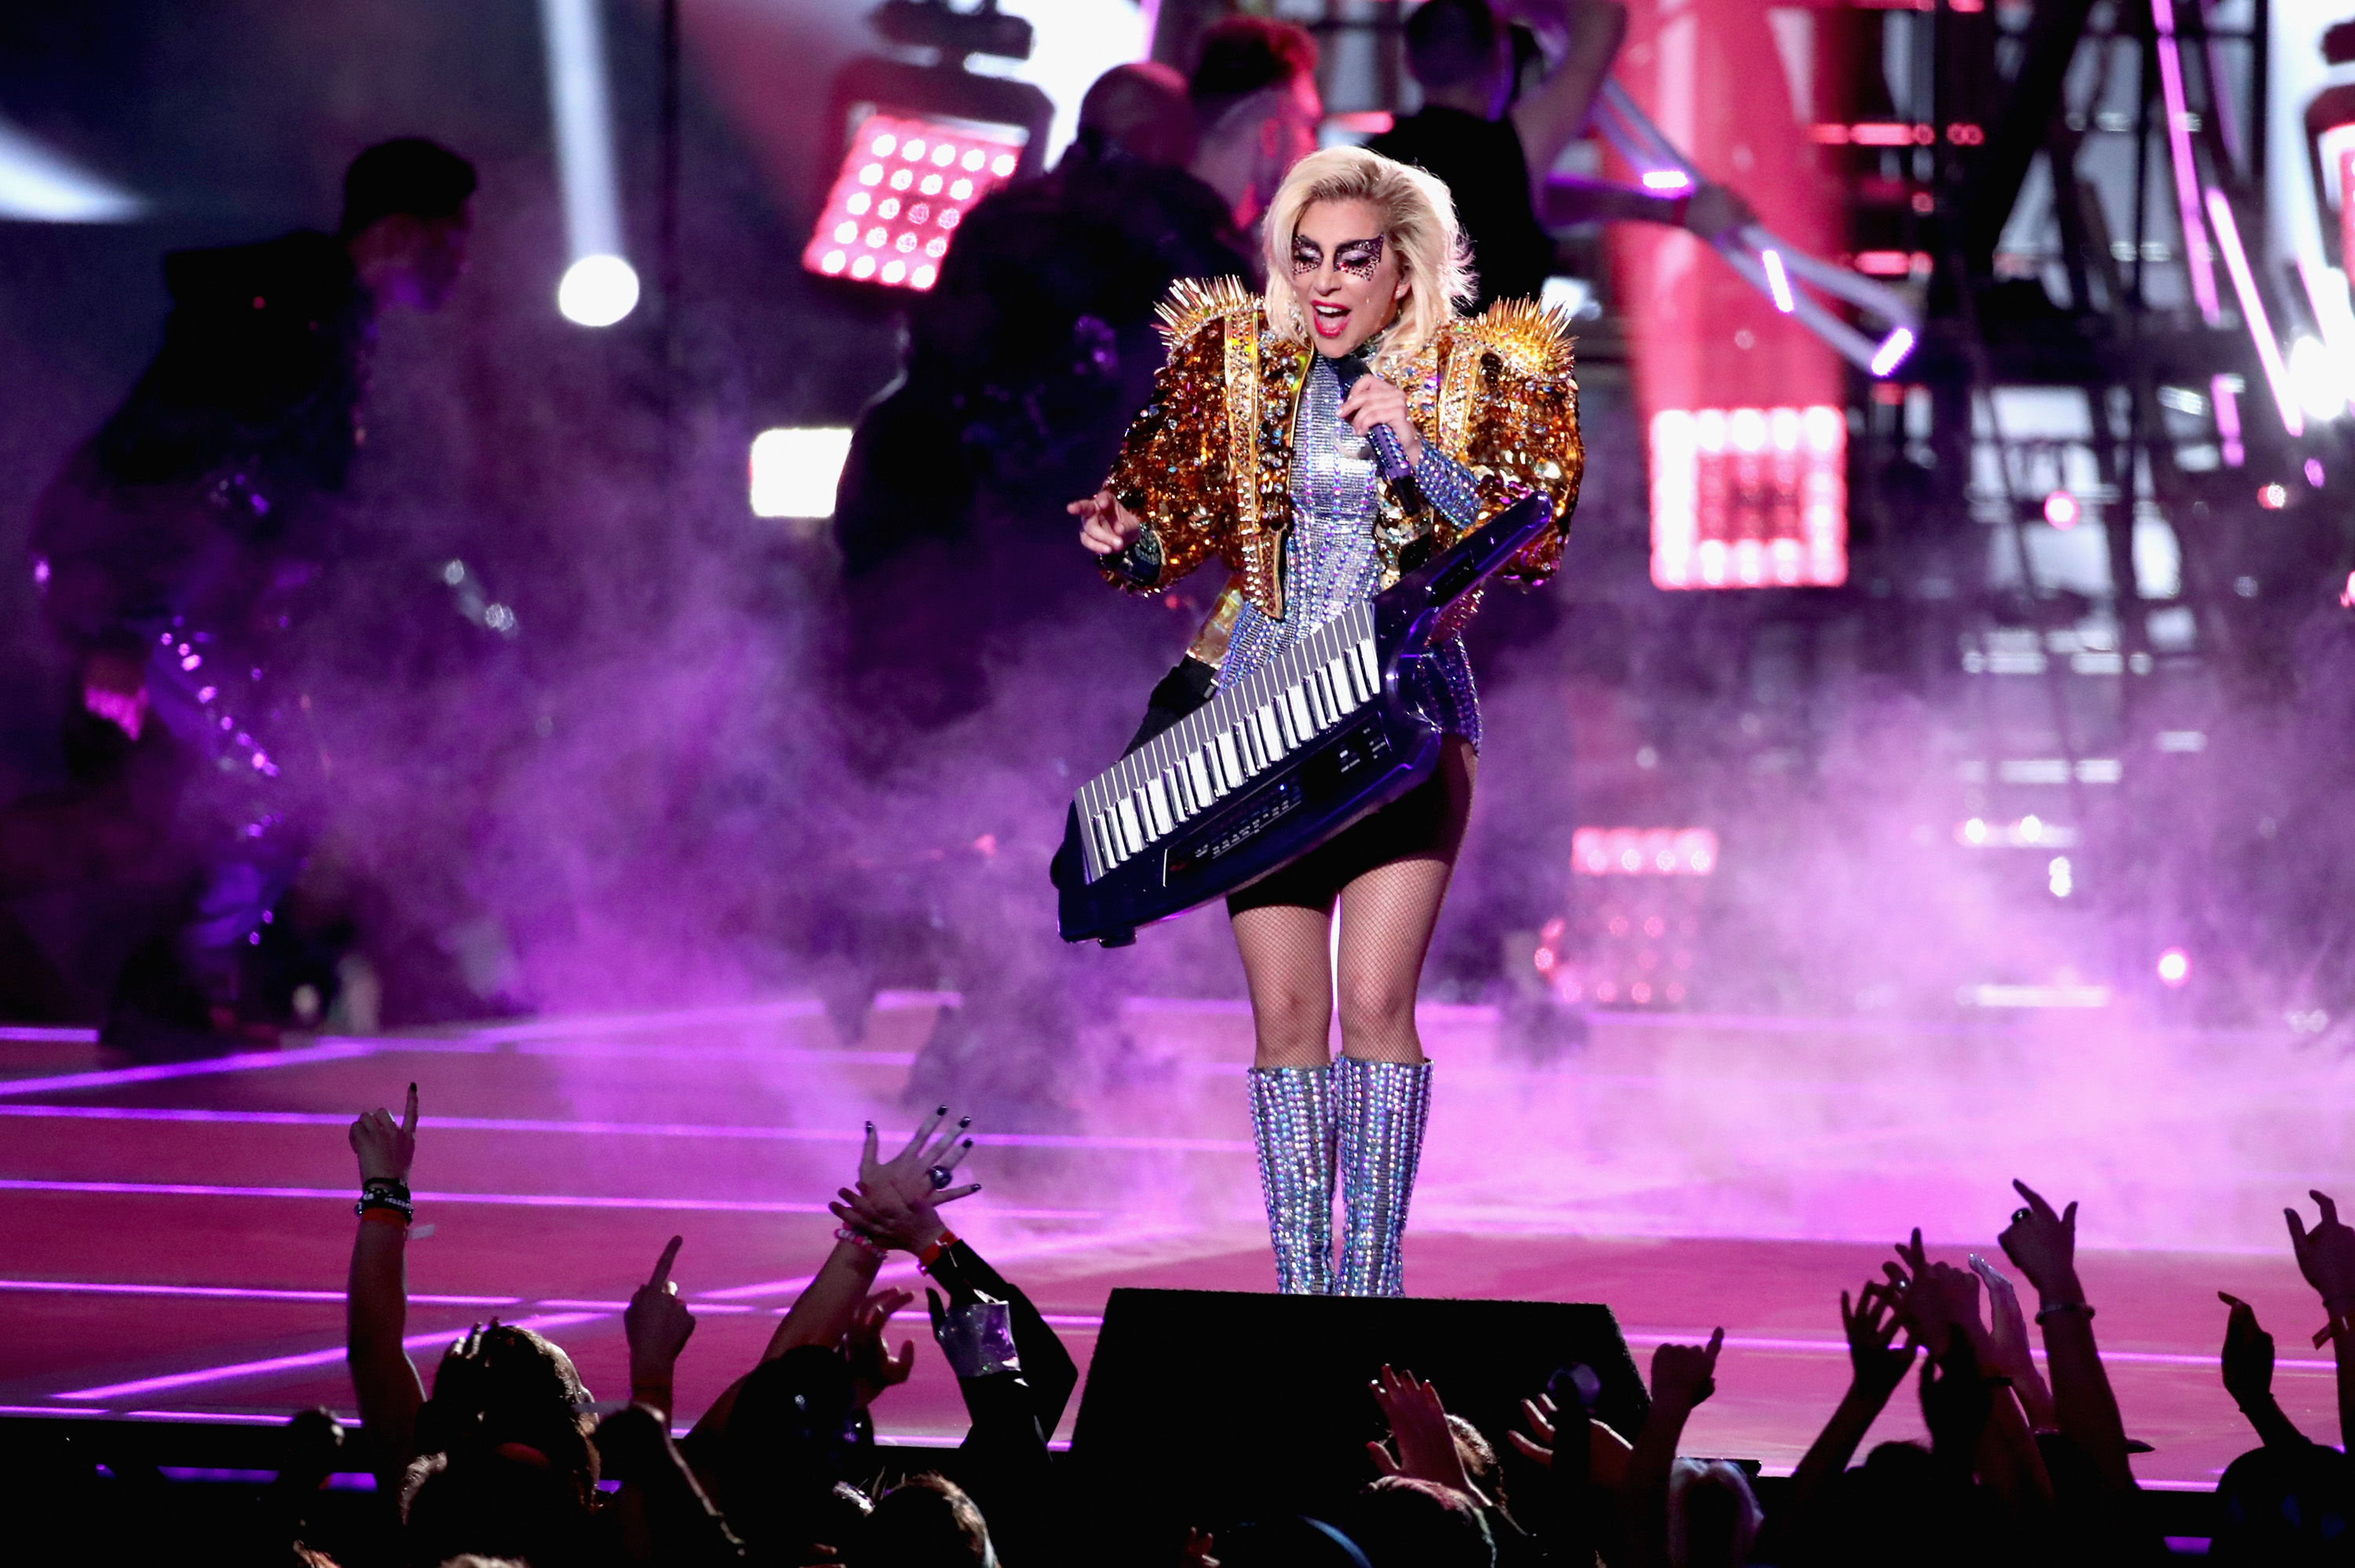 HOUSTON, TX - FEBRUARY 05: Musician Lady Gaga performs onstage during the Pepsi Zero Sugar Super Bowl LI Halftime Show at NRG Stadium on February 5, 2017 in Houston, Texas. (Photo by Christopher Polk/Getty Images)